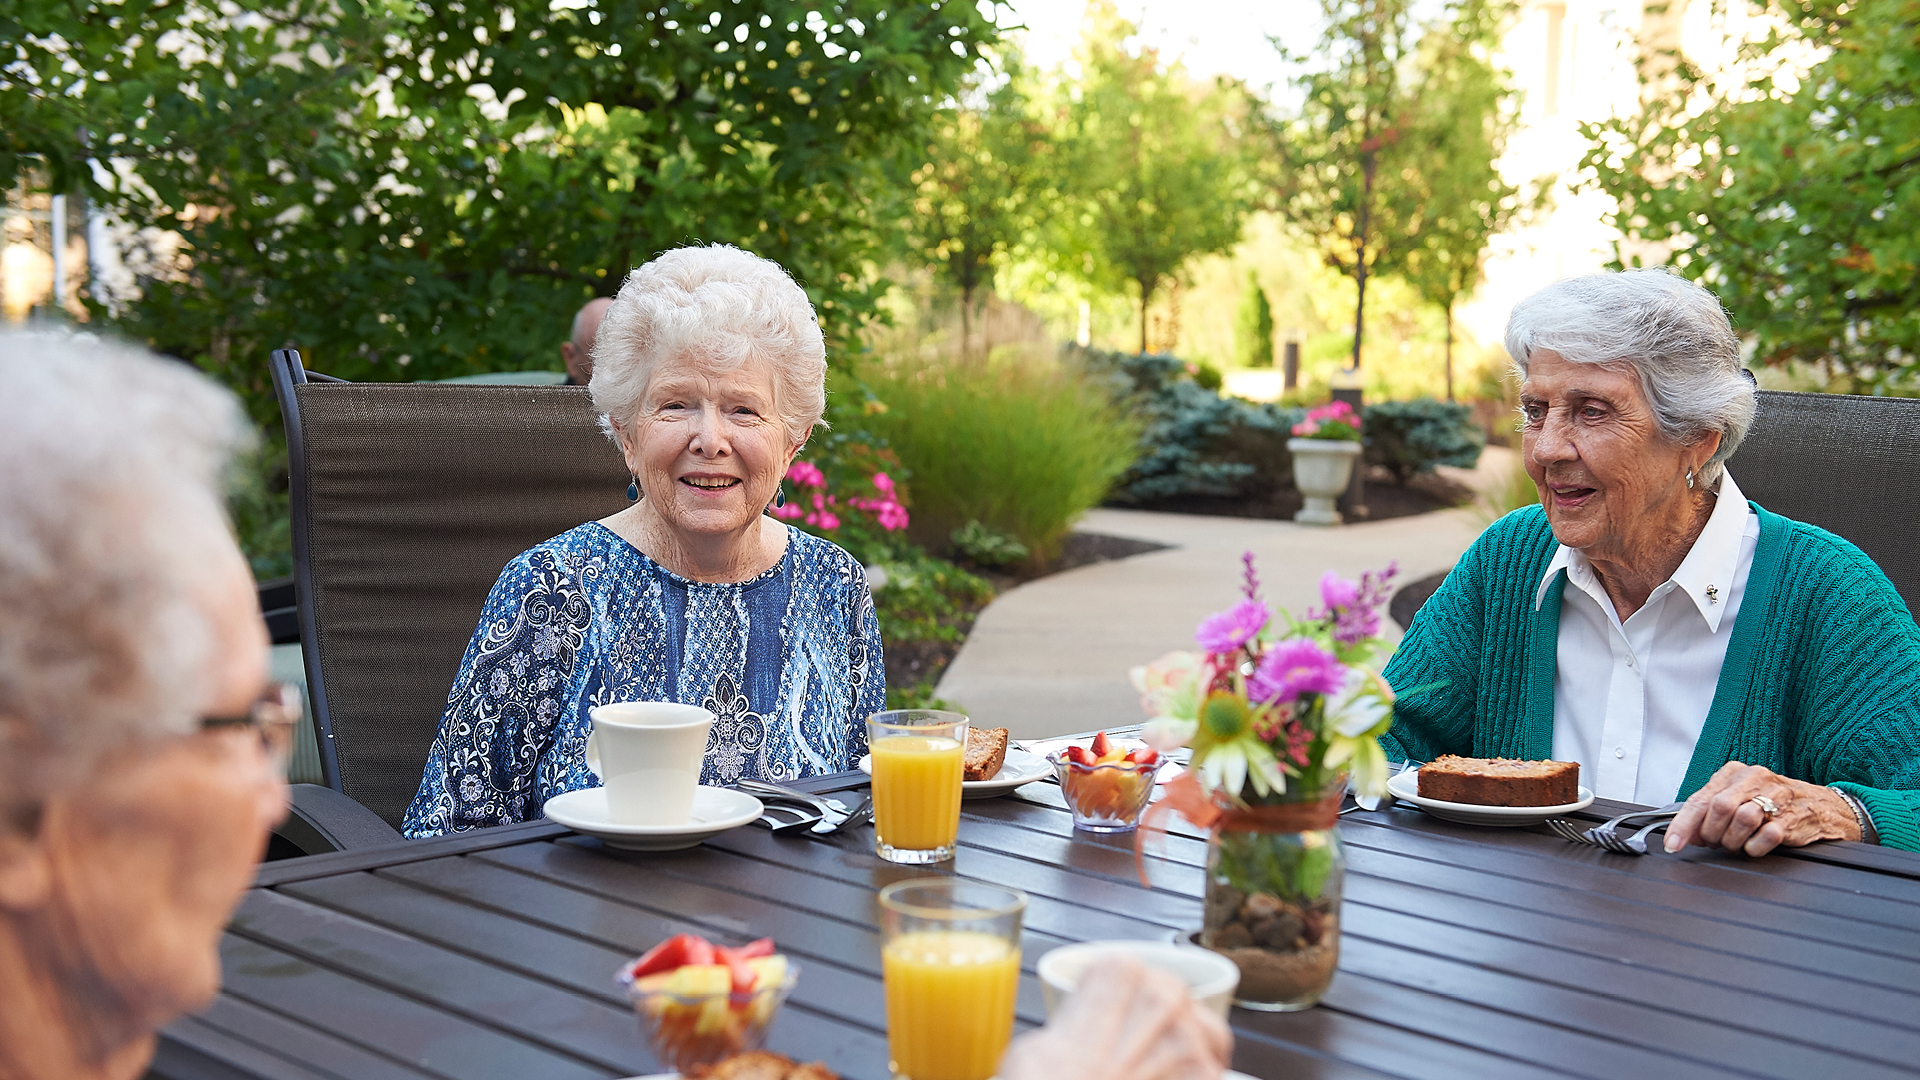 Featured image for “Benefits of Moving to Assisted Living”